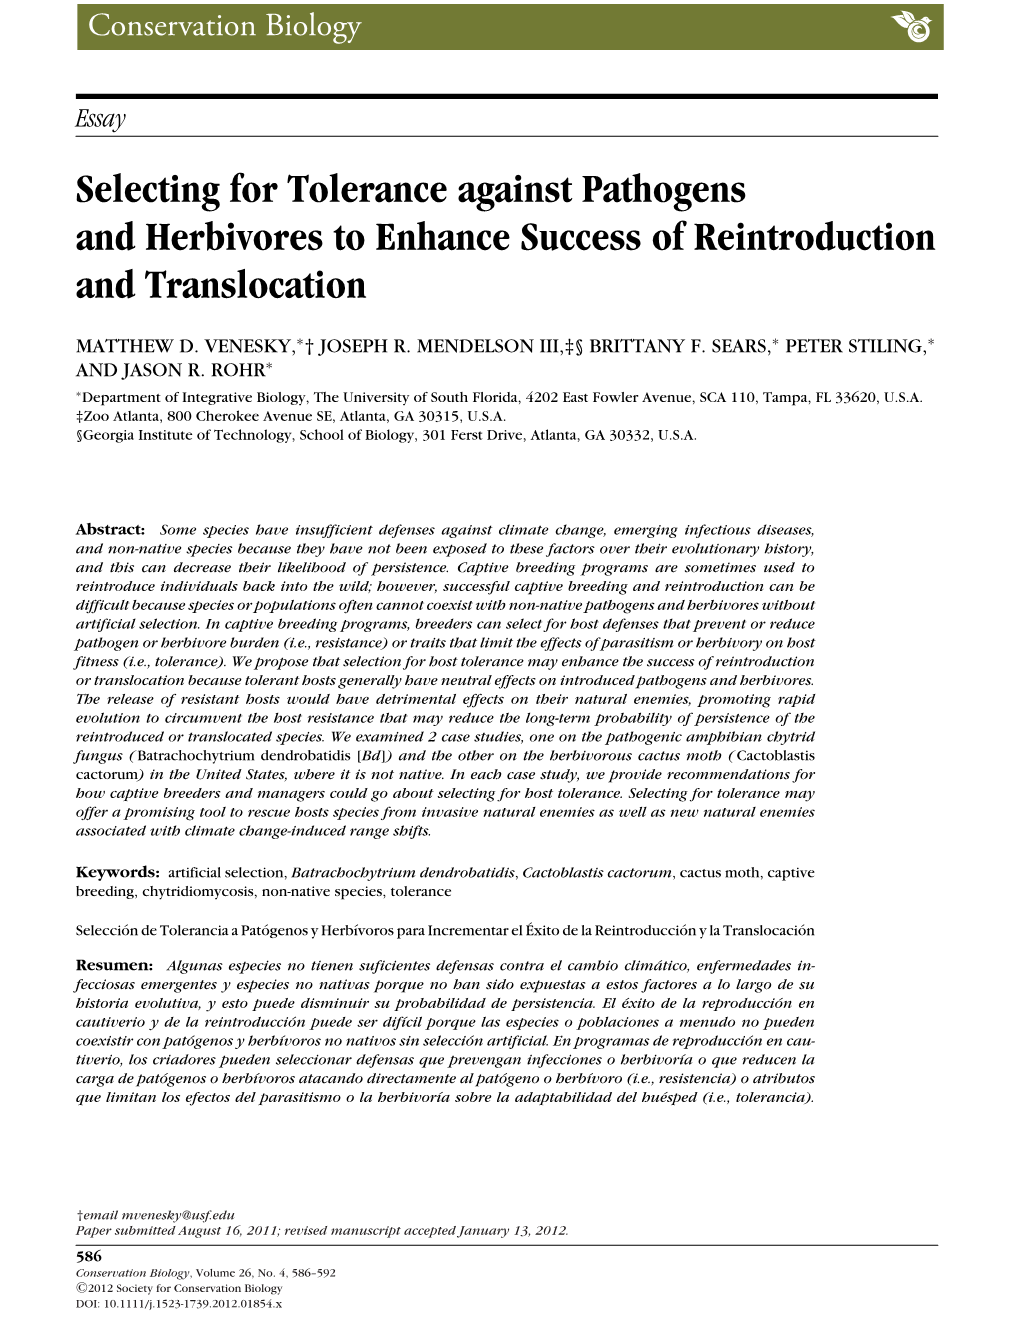 Selecting for Tolerance Against Pathogens and Herbivores to Enhance Success of Reintroduction and Translocation